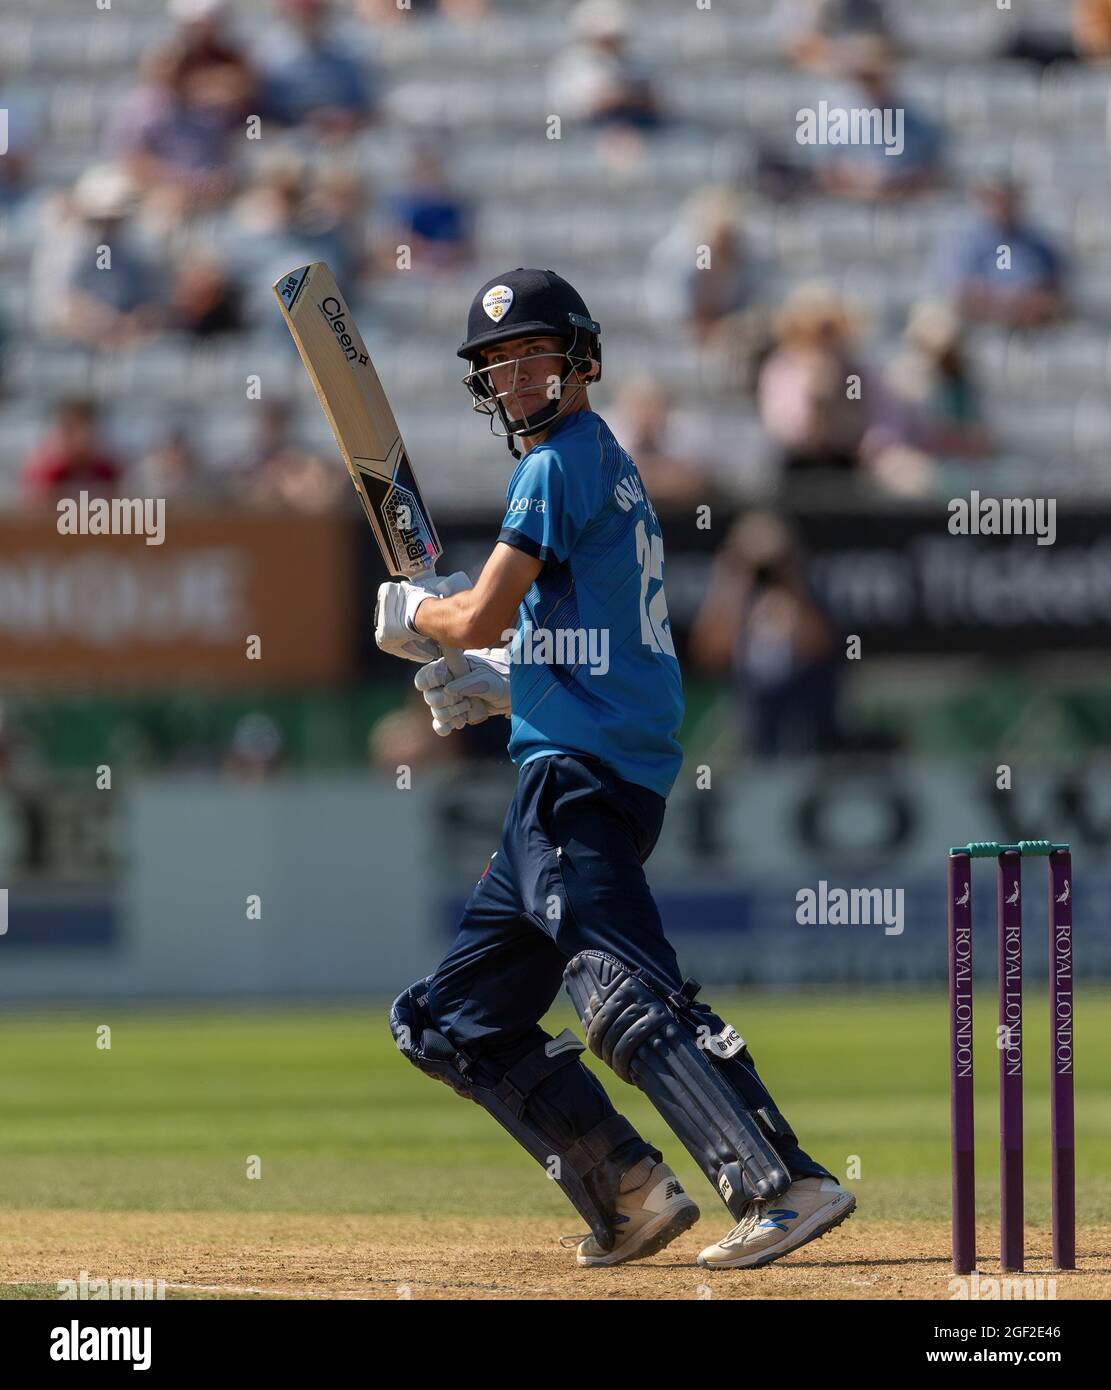 Mitch Wagstaff batting for Derbyshire in a Royal London Cup match against Surrey Stock Photo